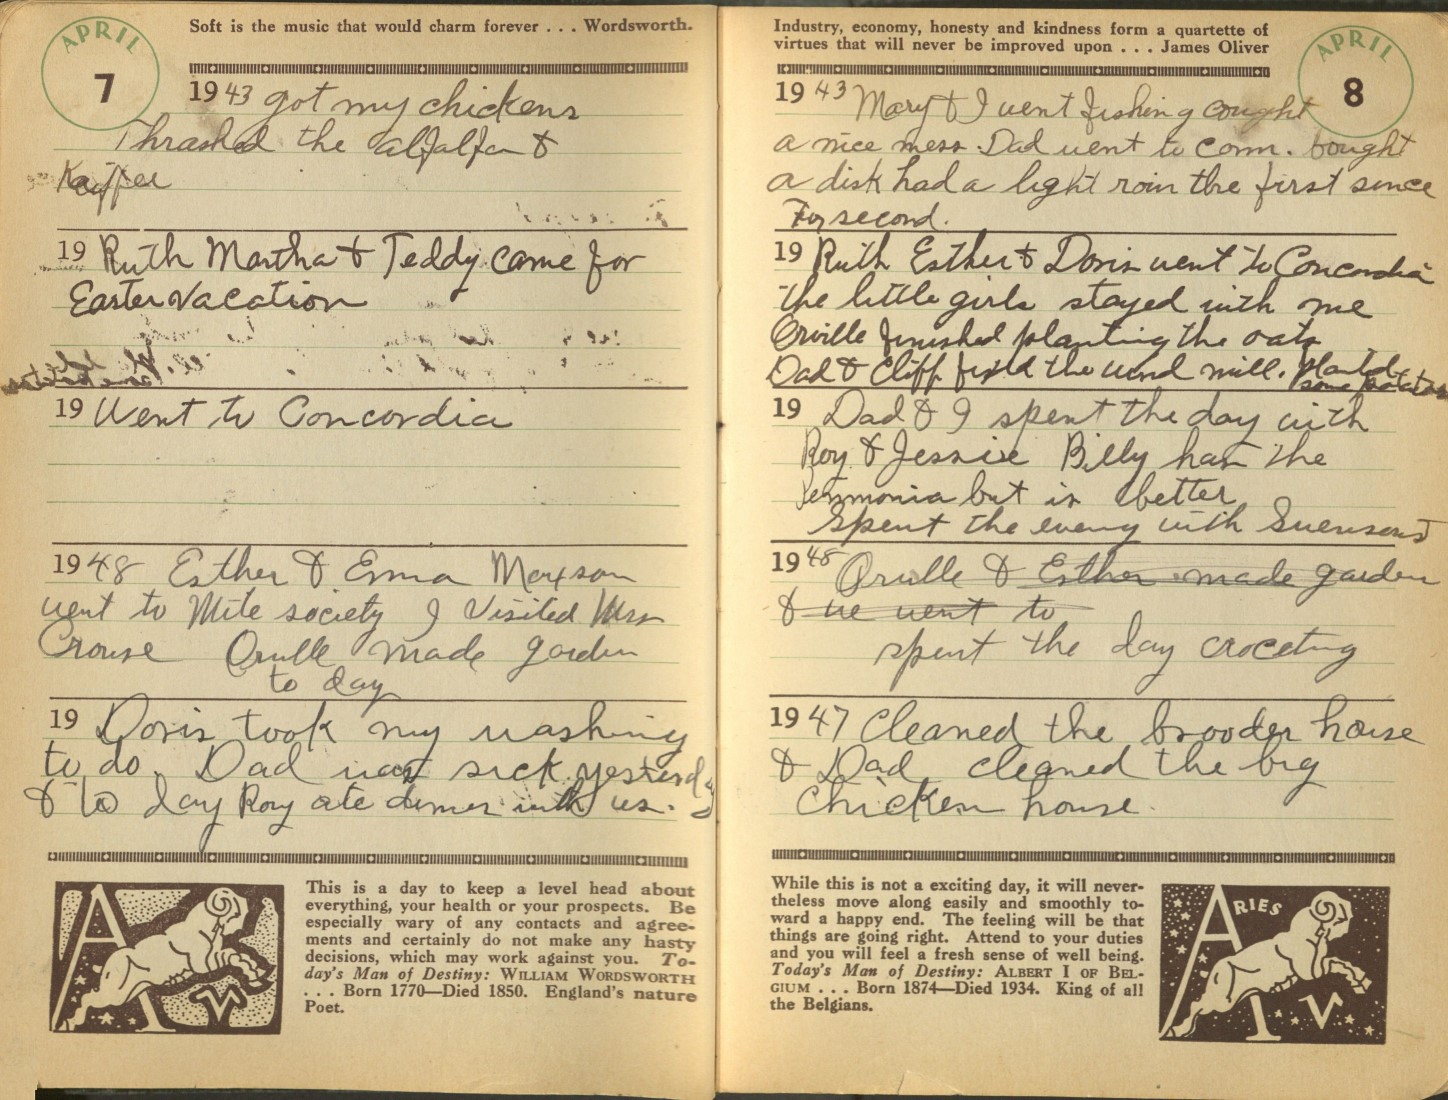 Two-page spread with rows of handwritten text on each. Typed quotations at the top and bottom of each page.